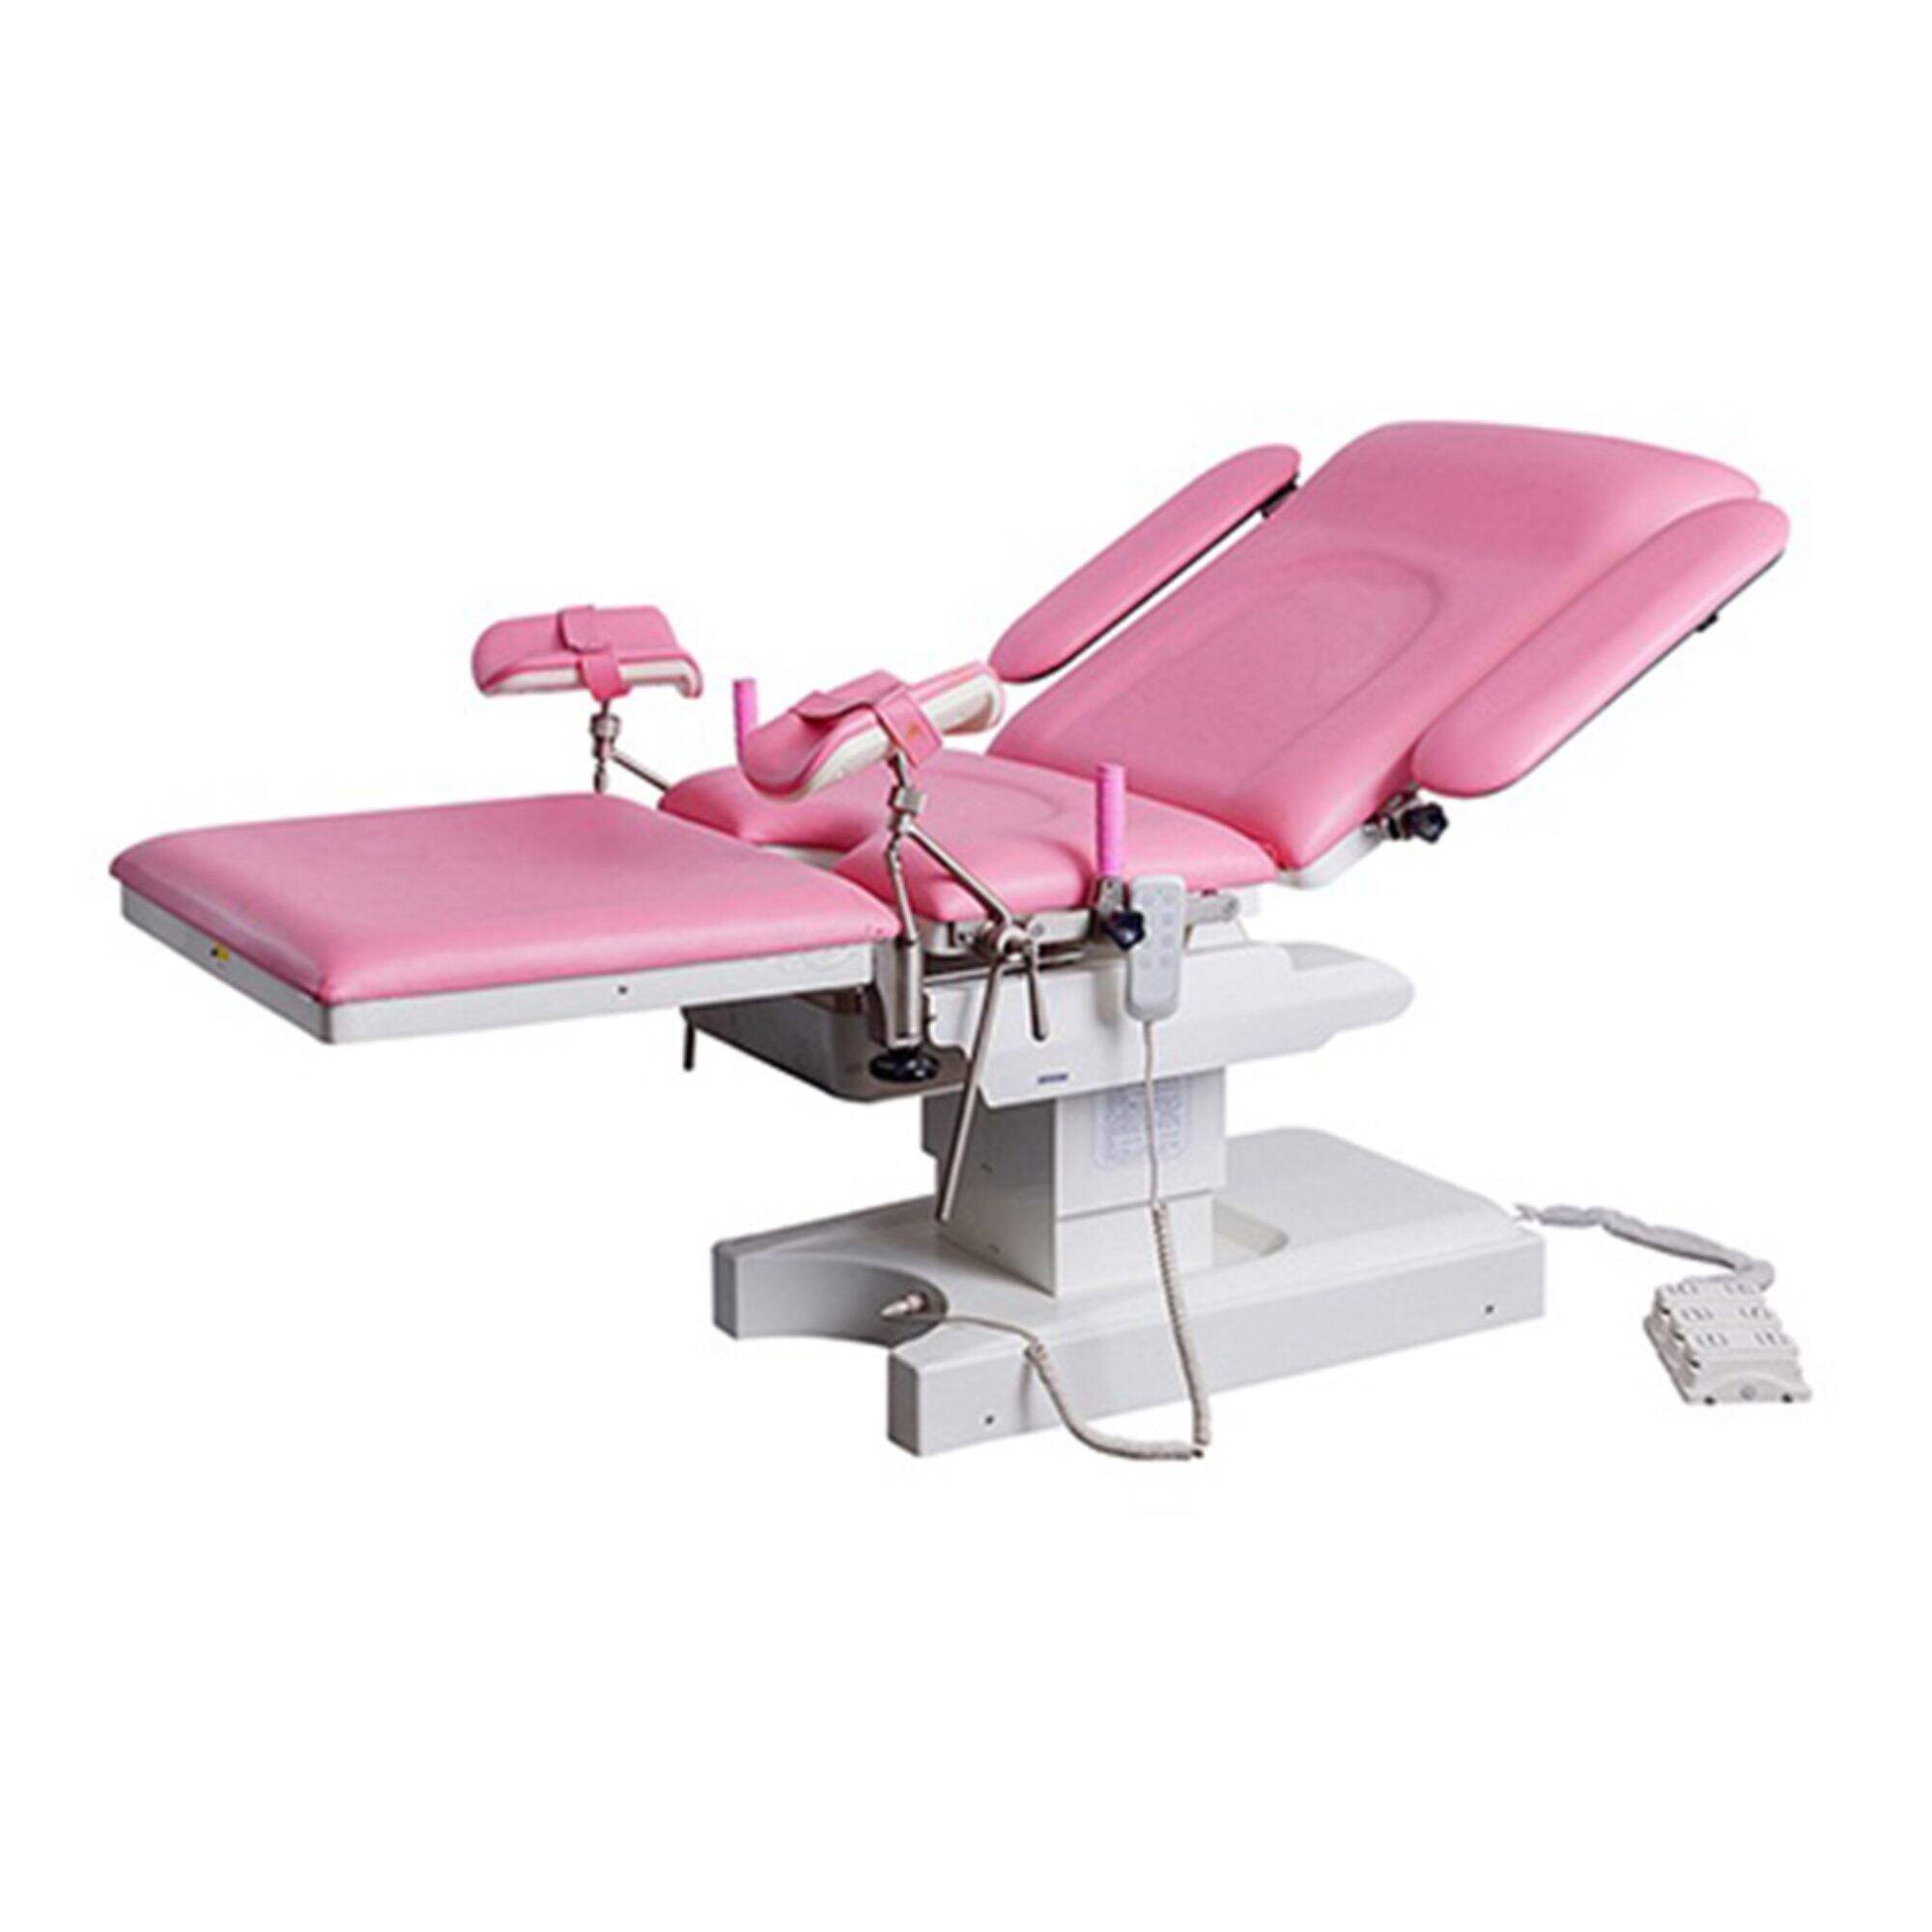 YFDC-LT02 Electric Gynecology & Obstetric Table